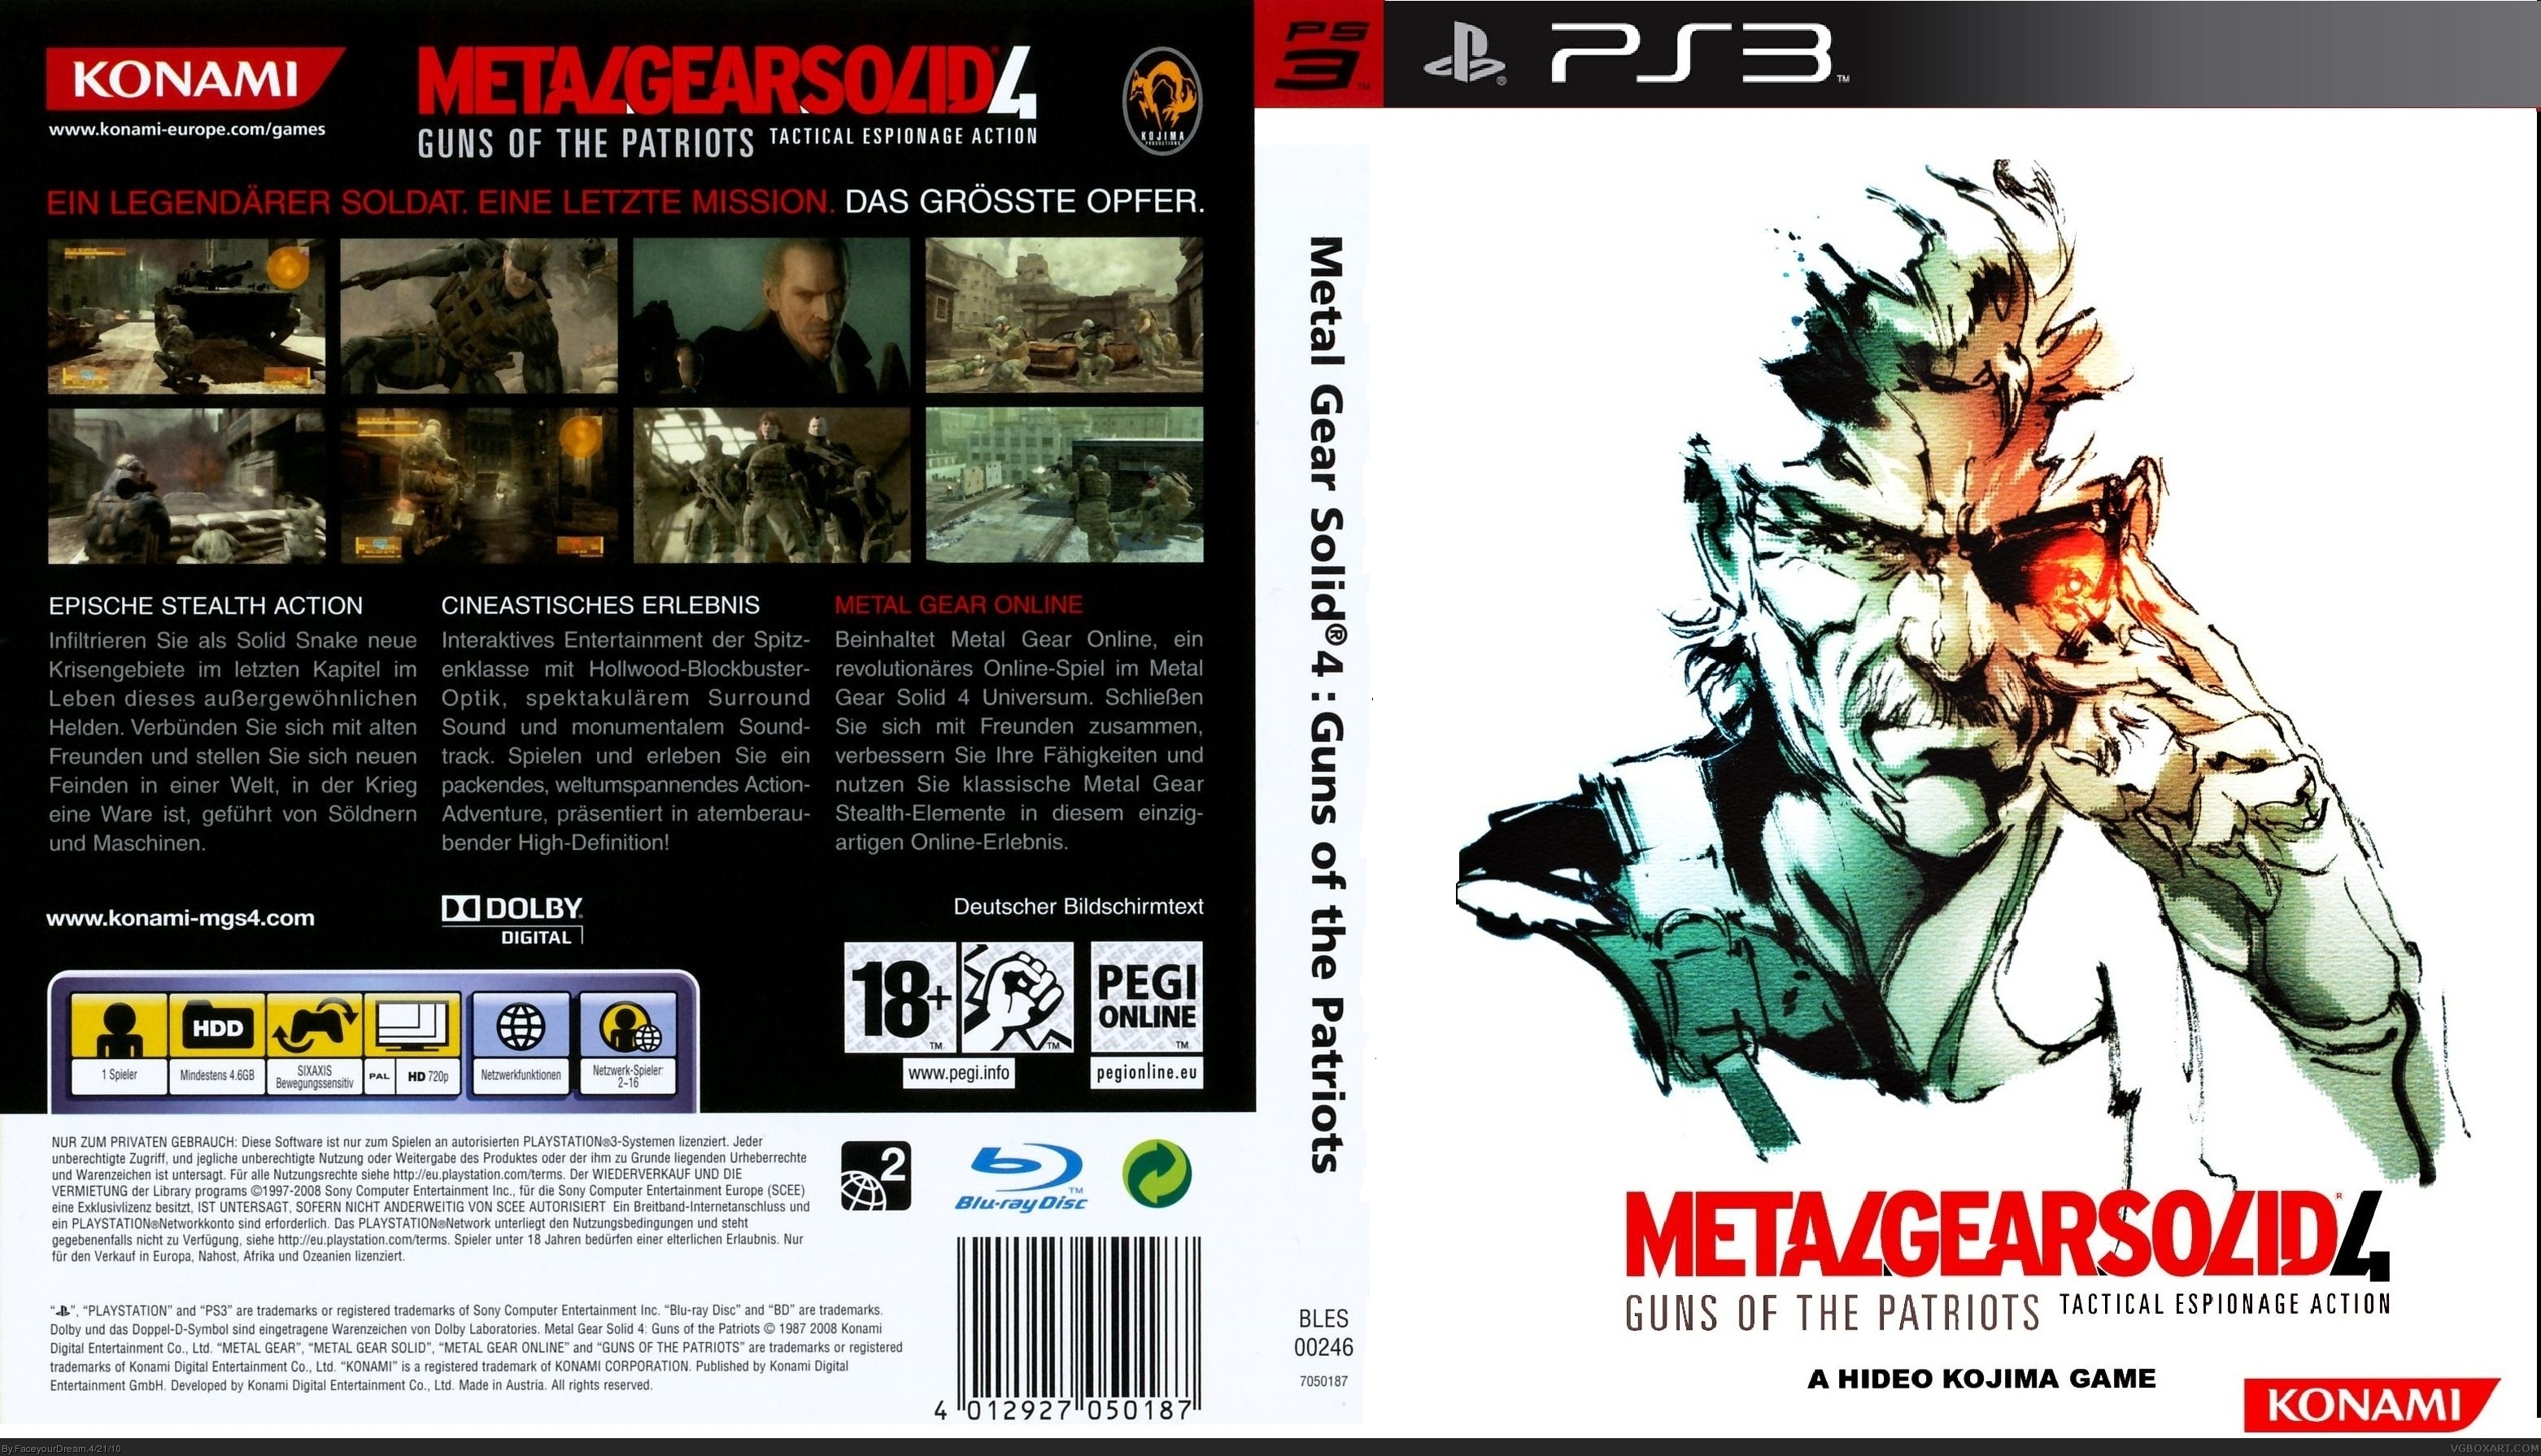 Metal Gear Solid 4 (German limited edition) box cover